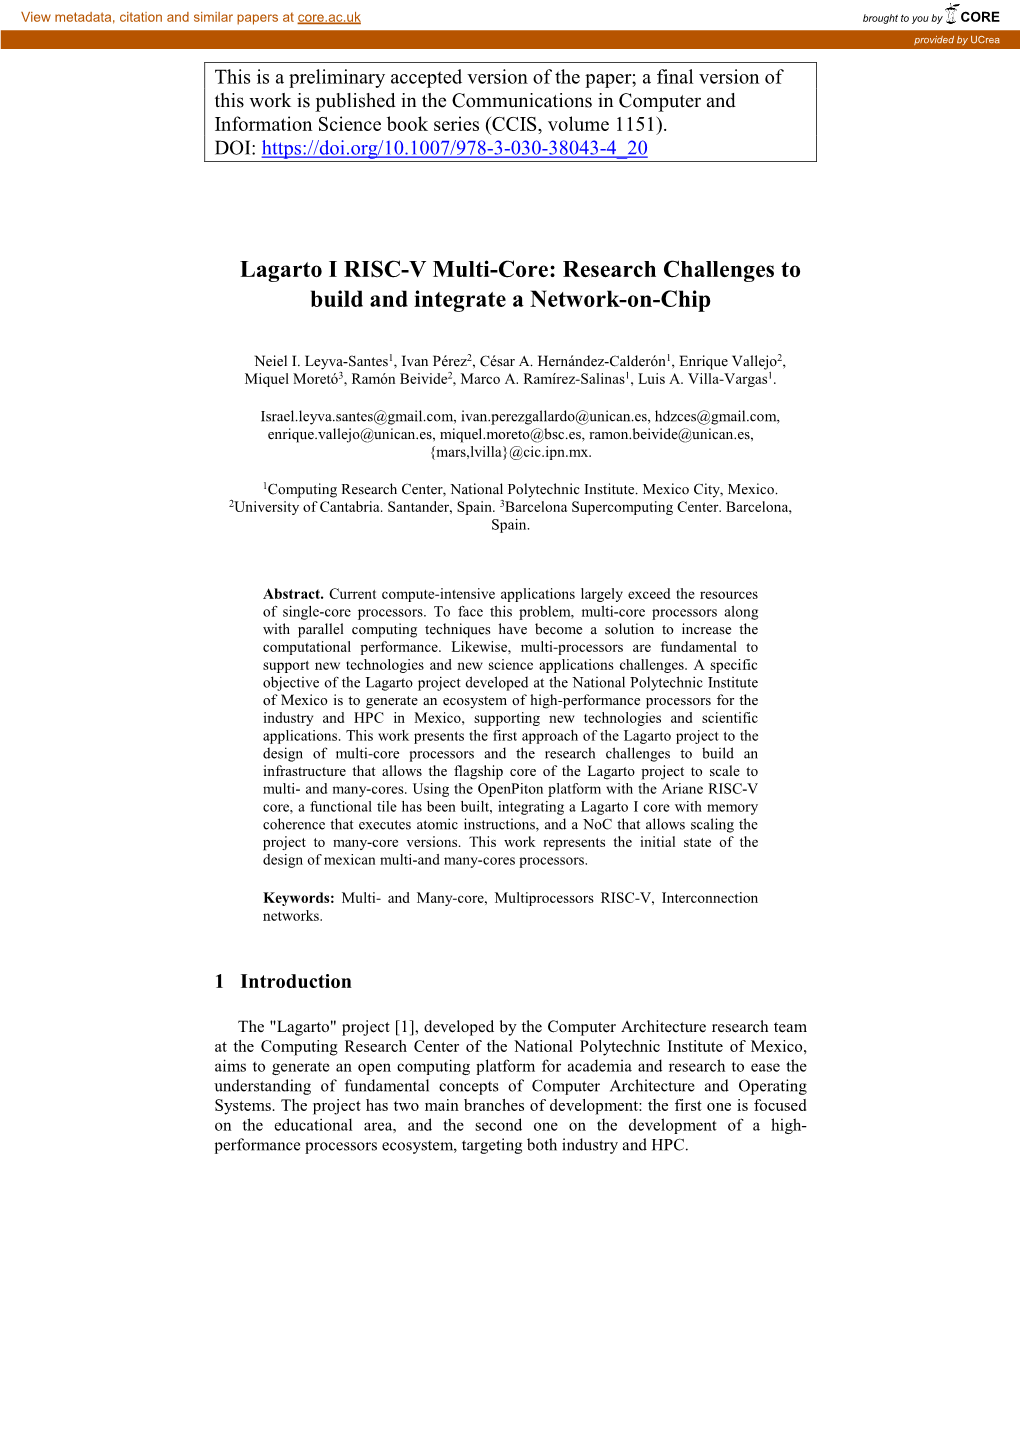 Lagarto I RISC-V Multi-Core: Research Challenges to Build and Integrate a Network-On-Chip